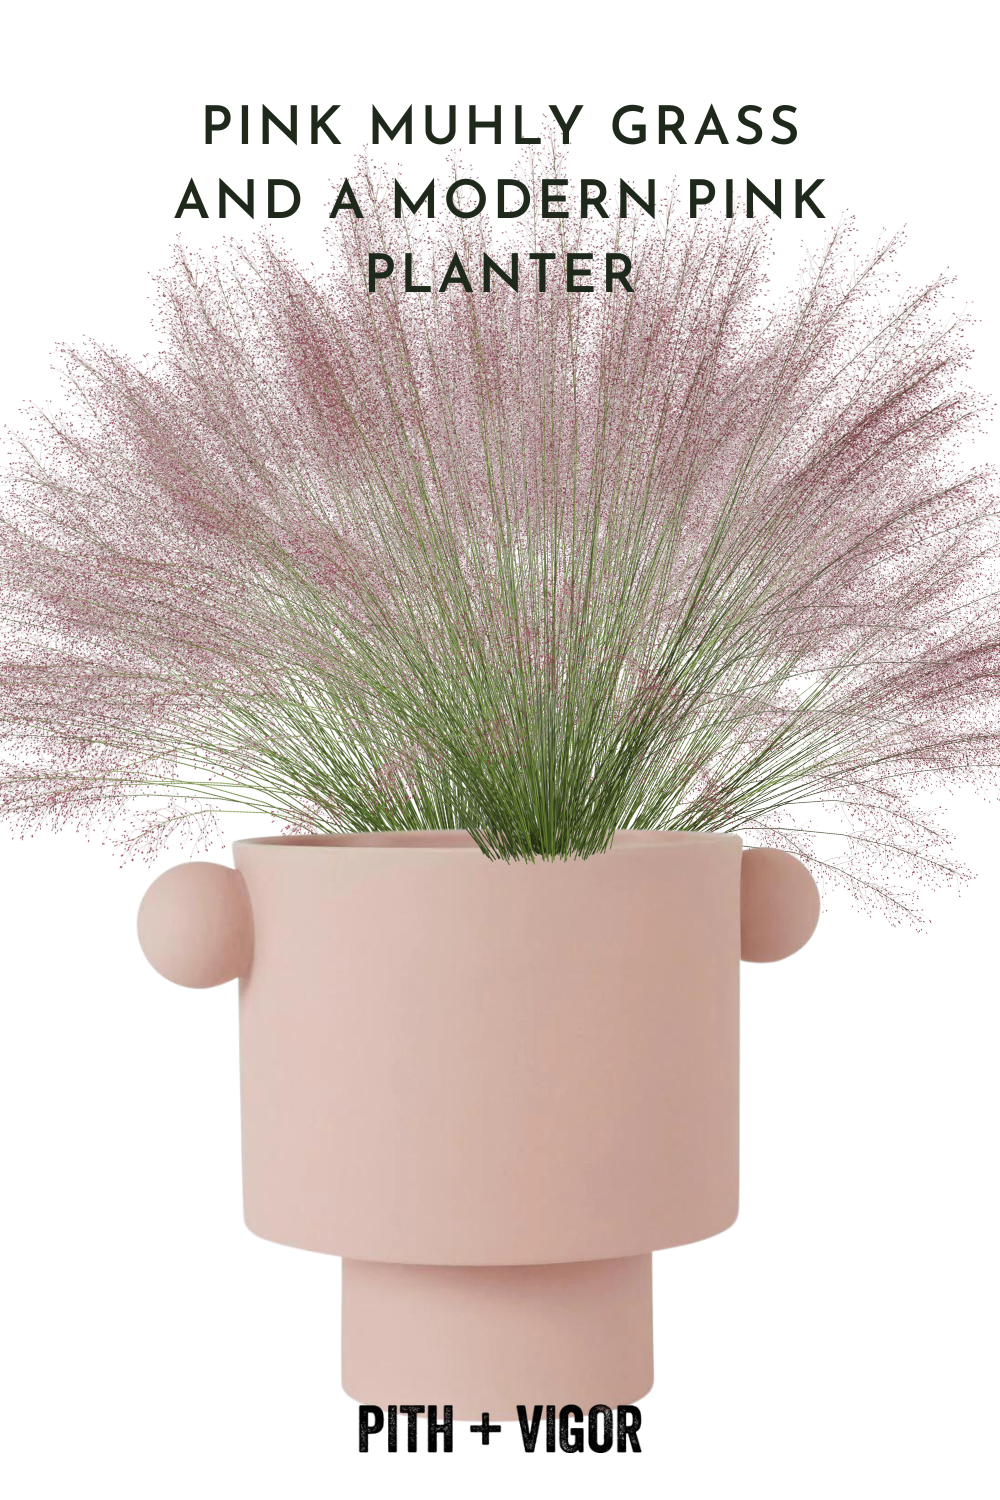 pink muhly grass and pink planter container garden